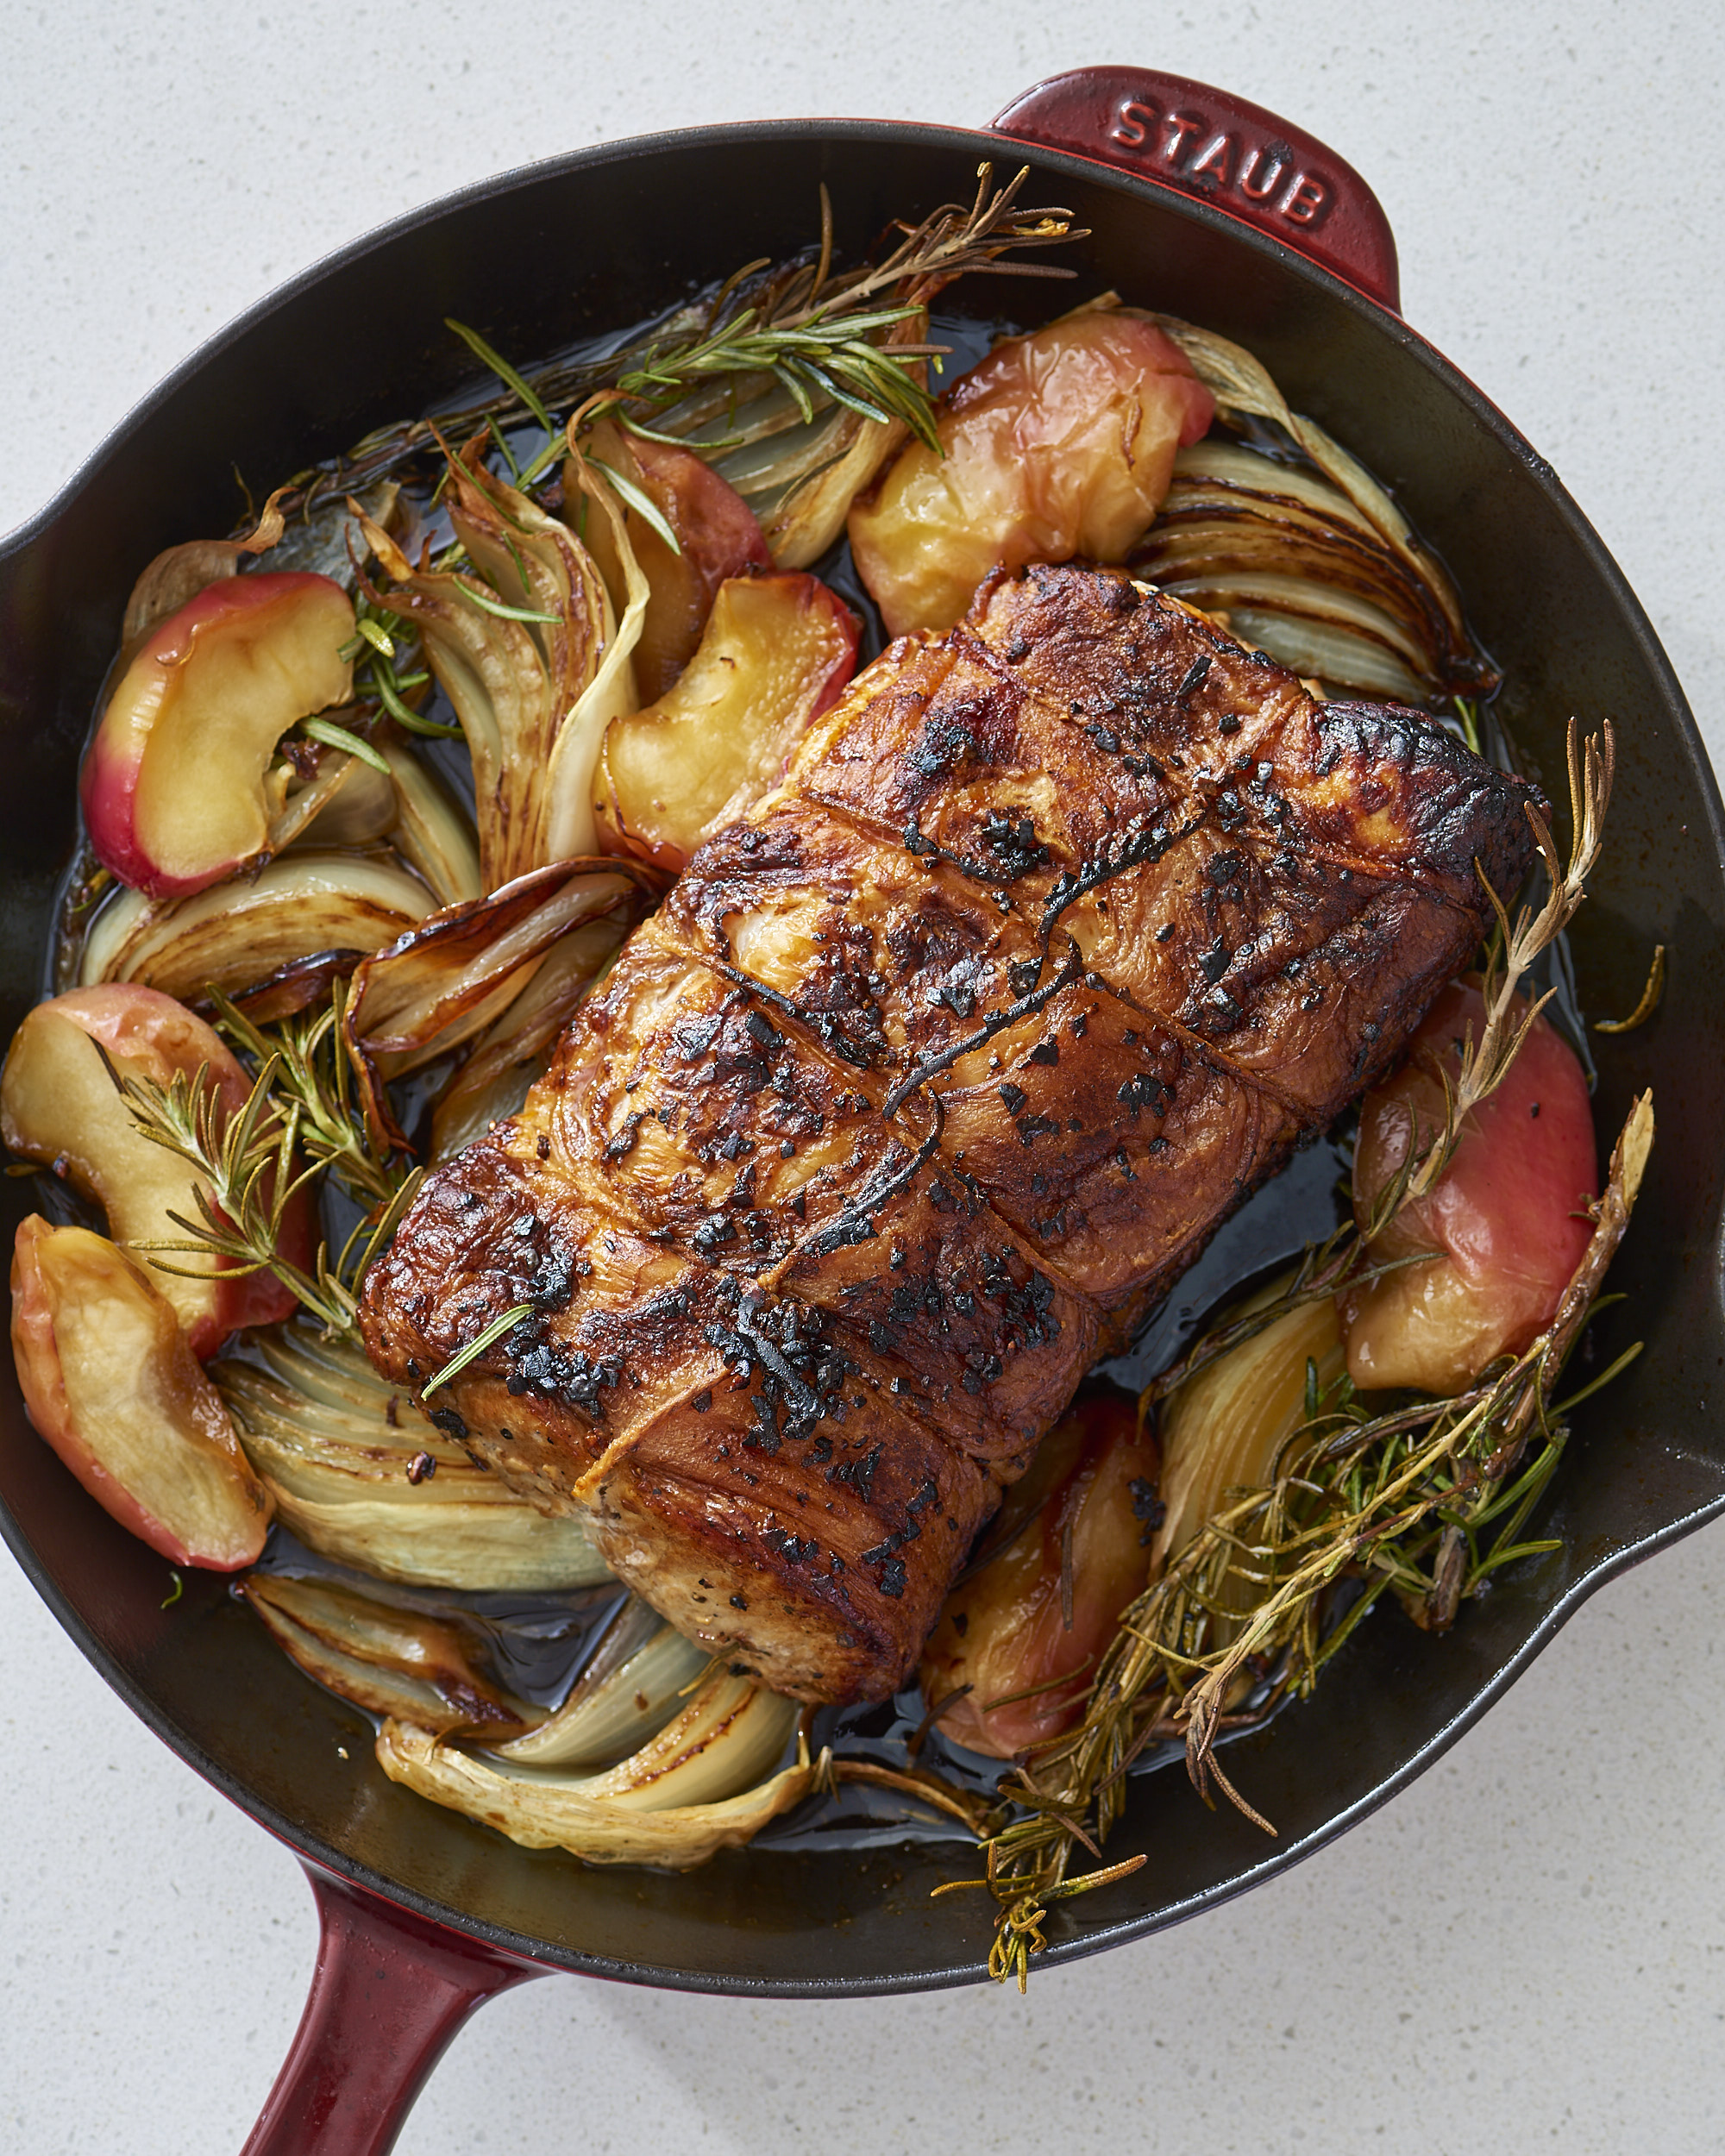 How To Make A Juicy Pork Roast With Apples And Onions Kitchn,Best Pressure Cooker Singapore